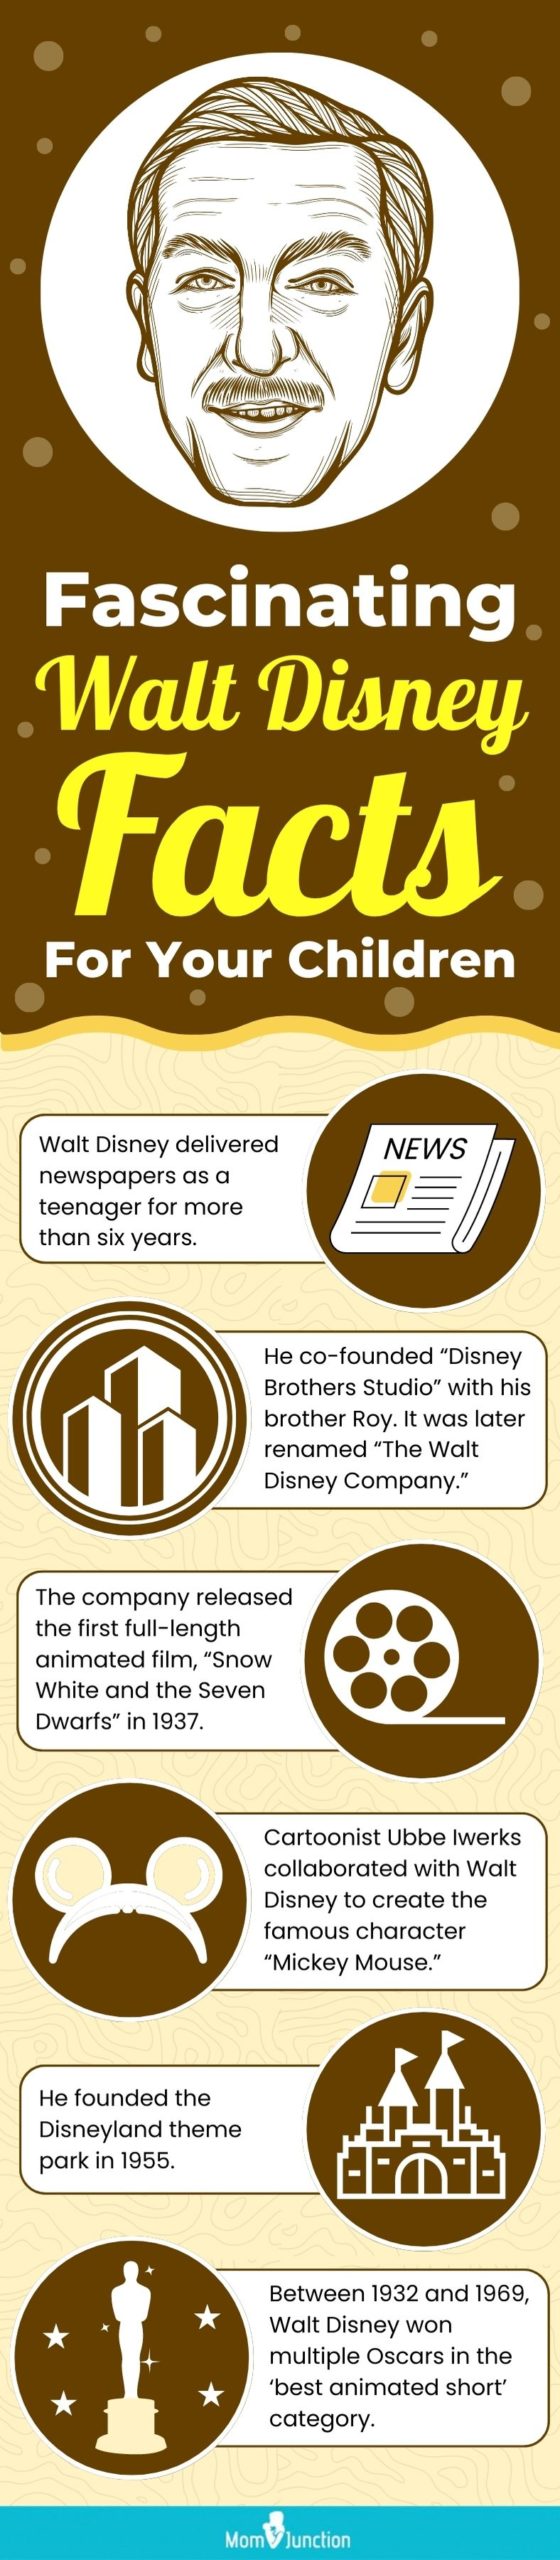 fascinating walt disney facts for your children (infographic)